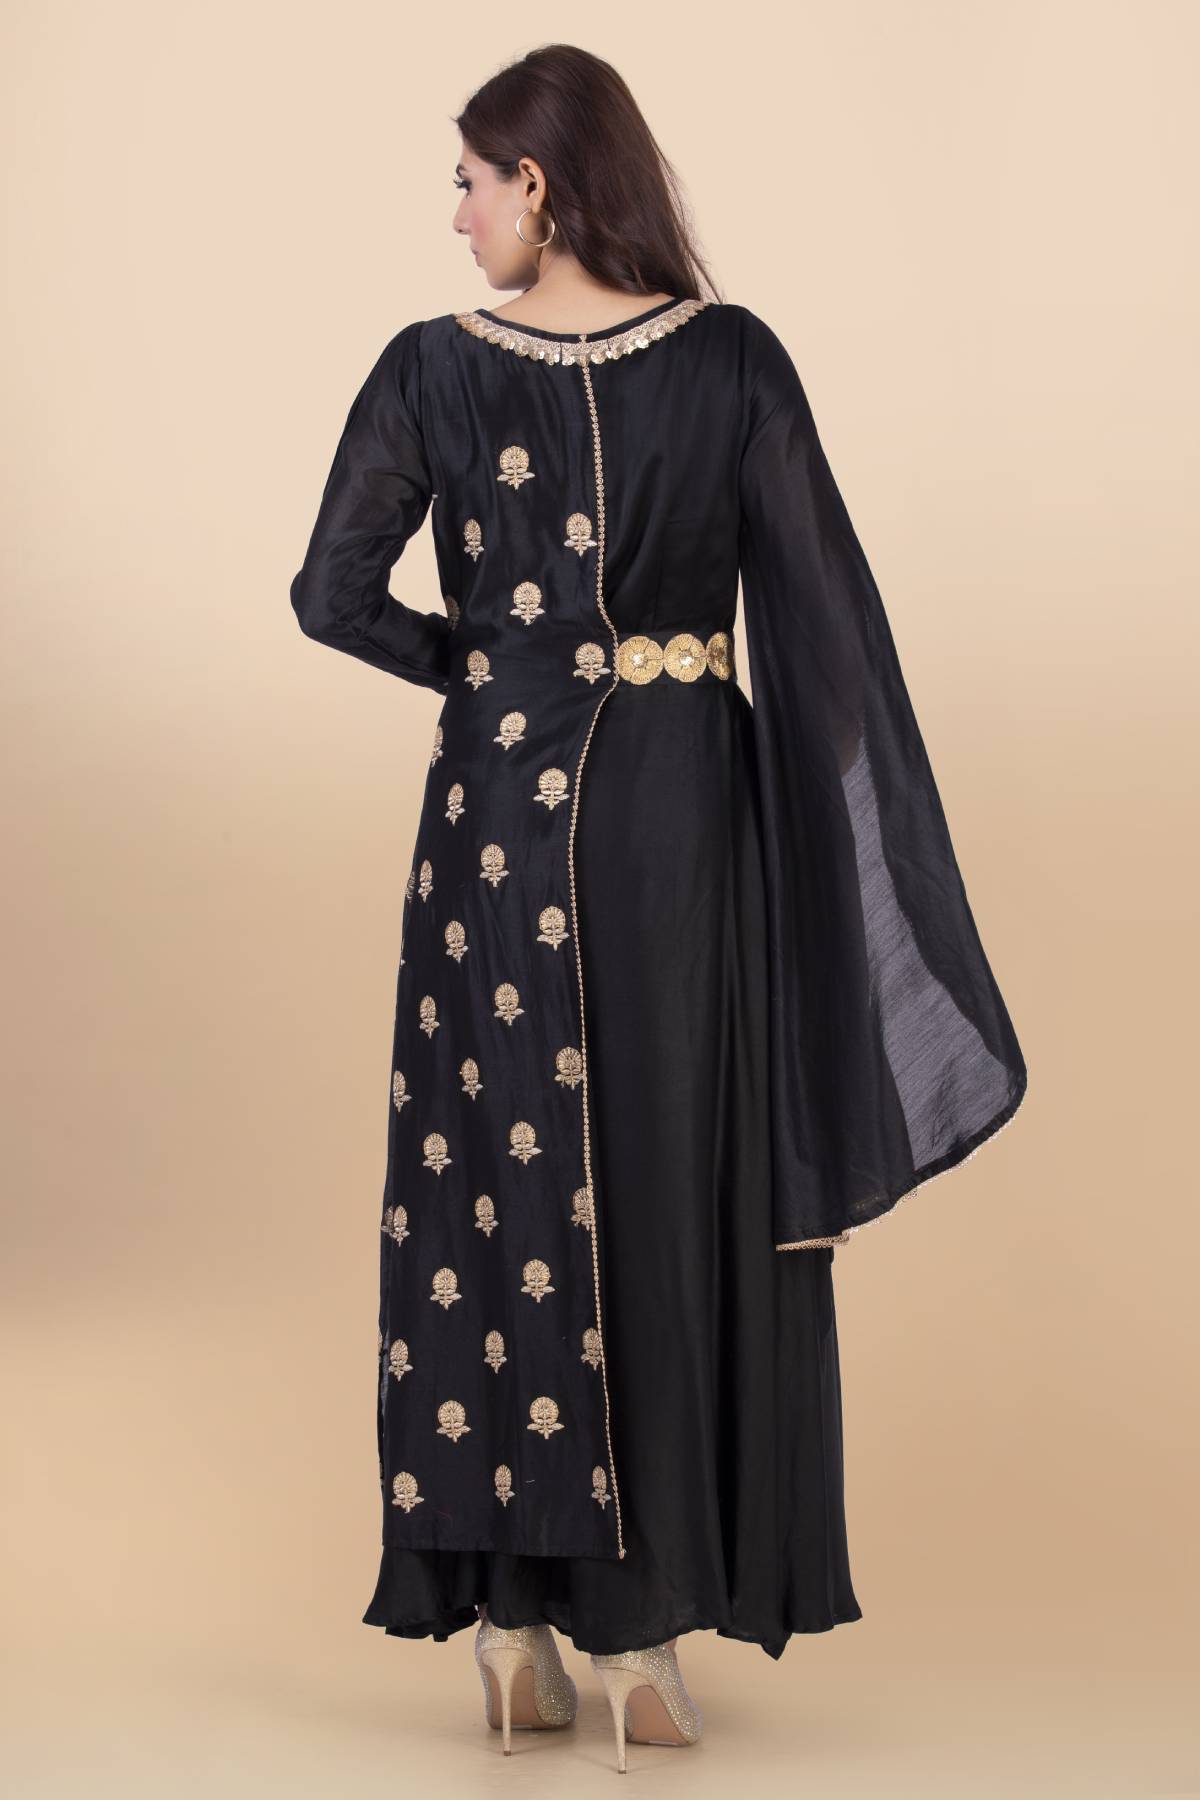 Overlapping Drape Dress Gown